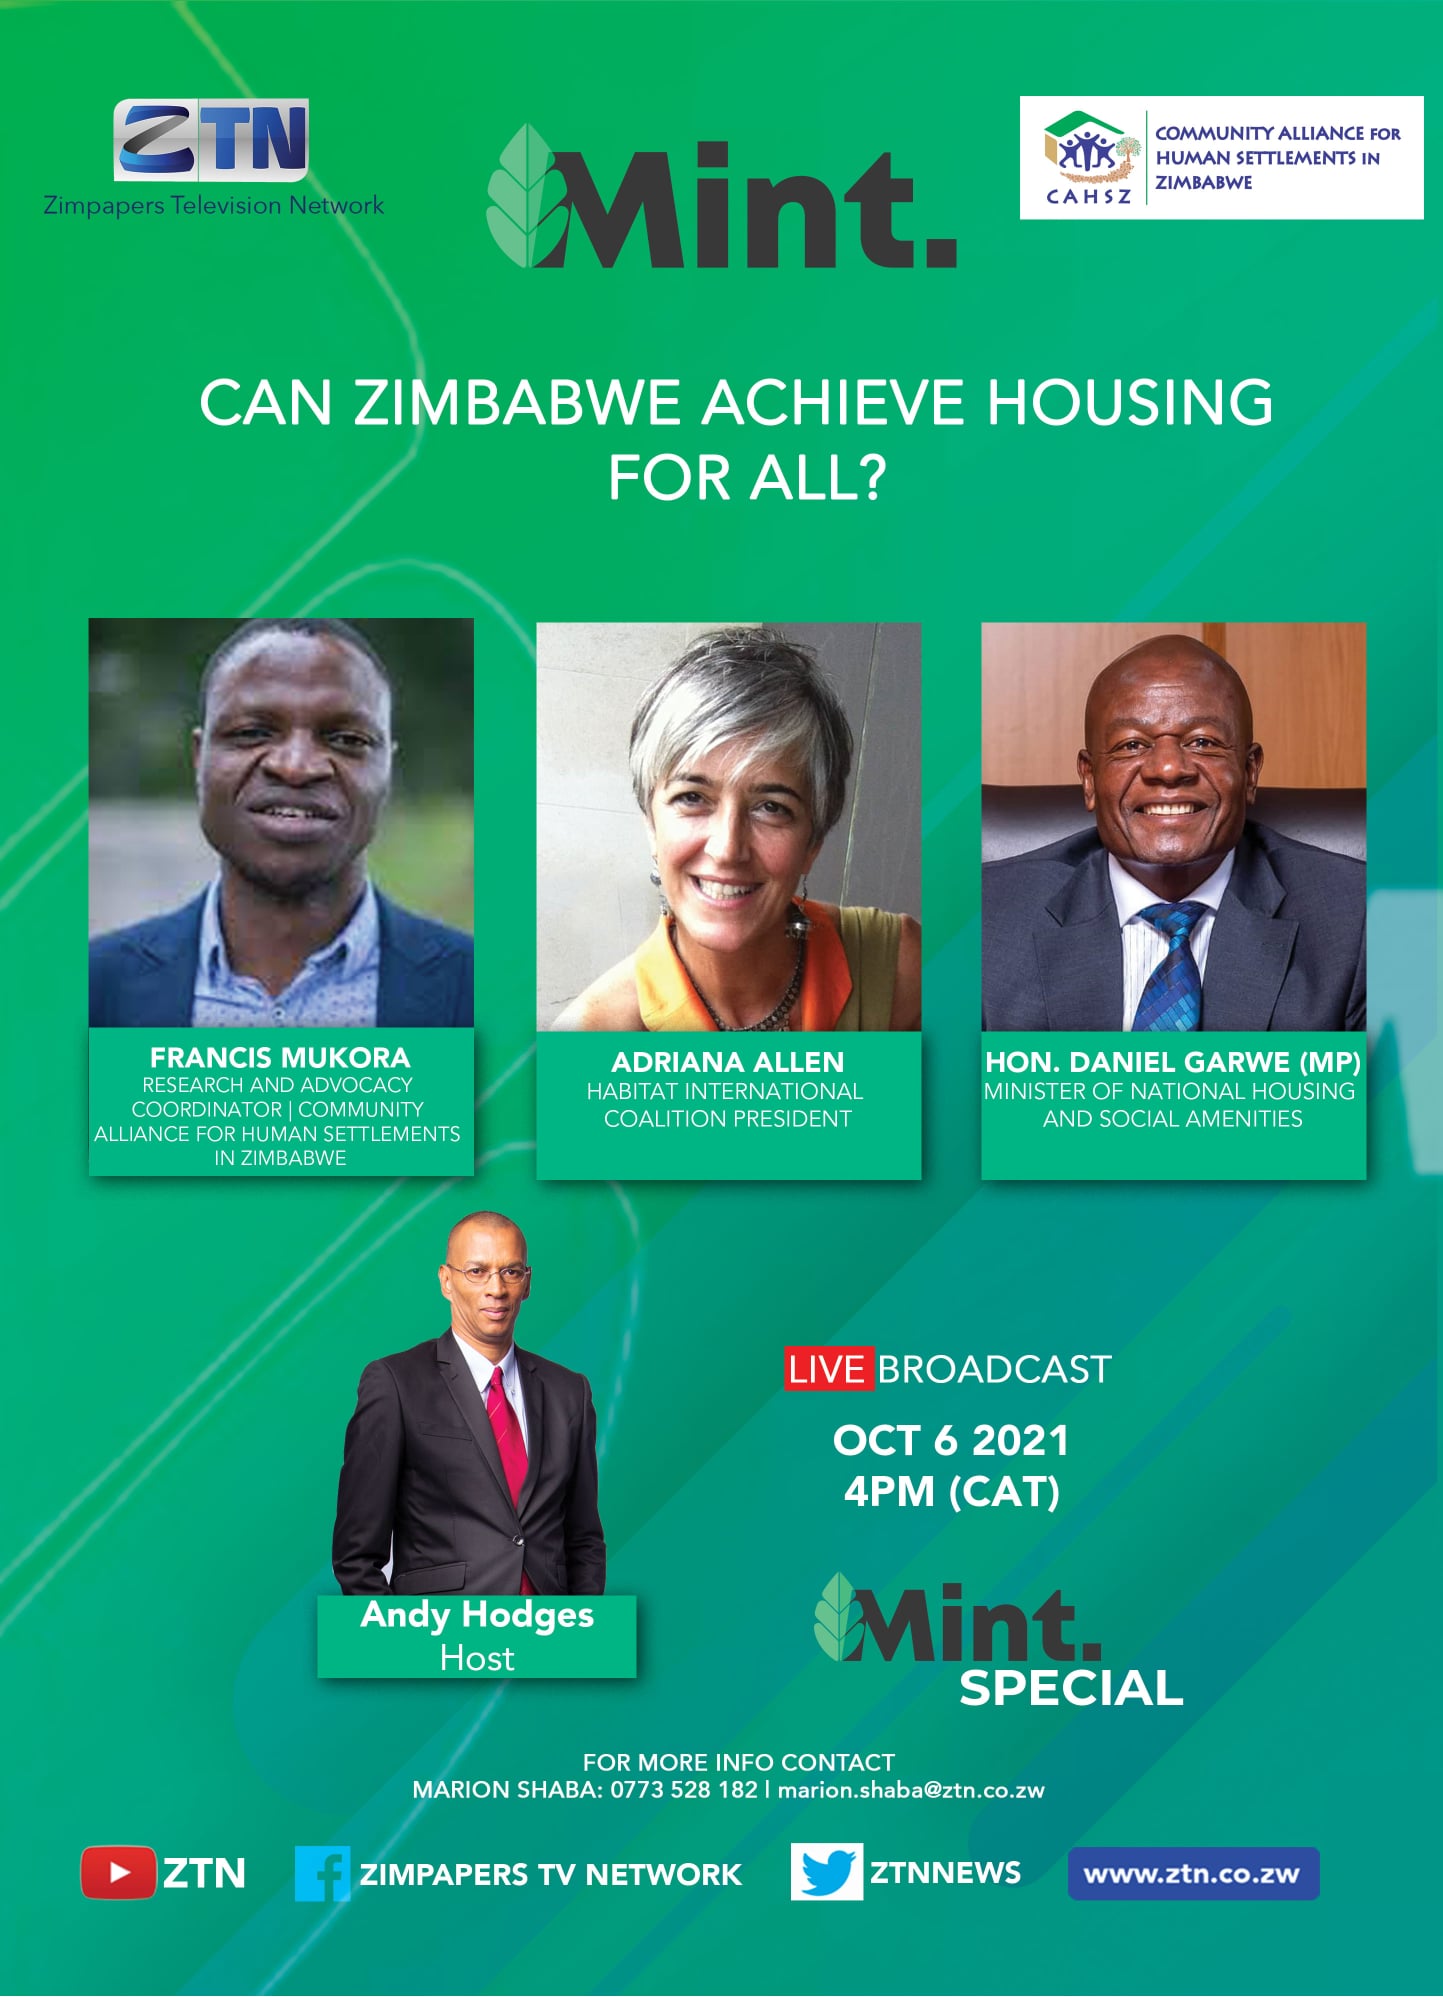 HIC contributions to the debate on the Zimbabwe Human Settlements Policy